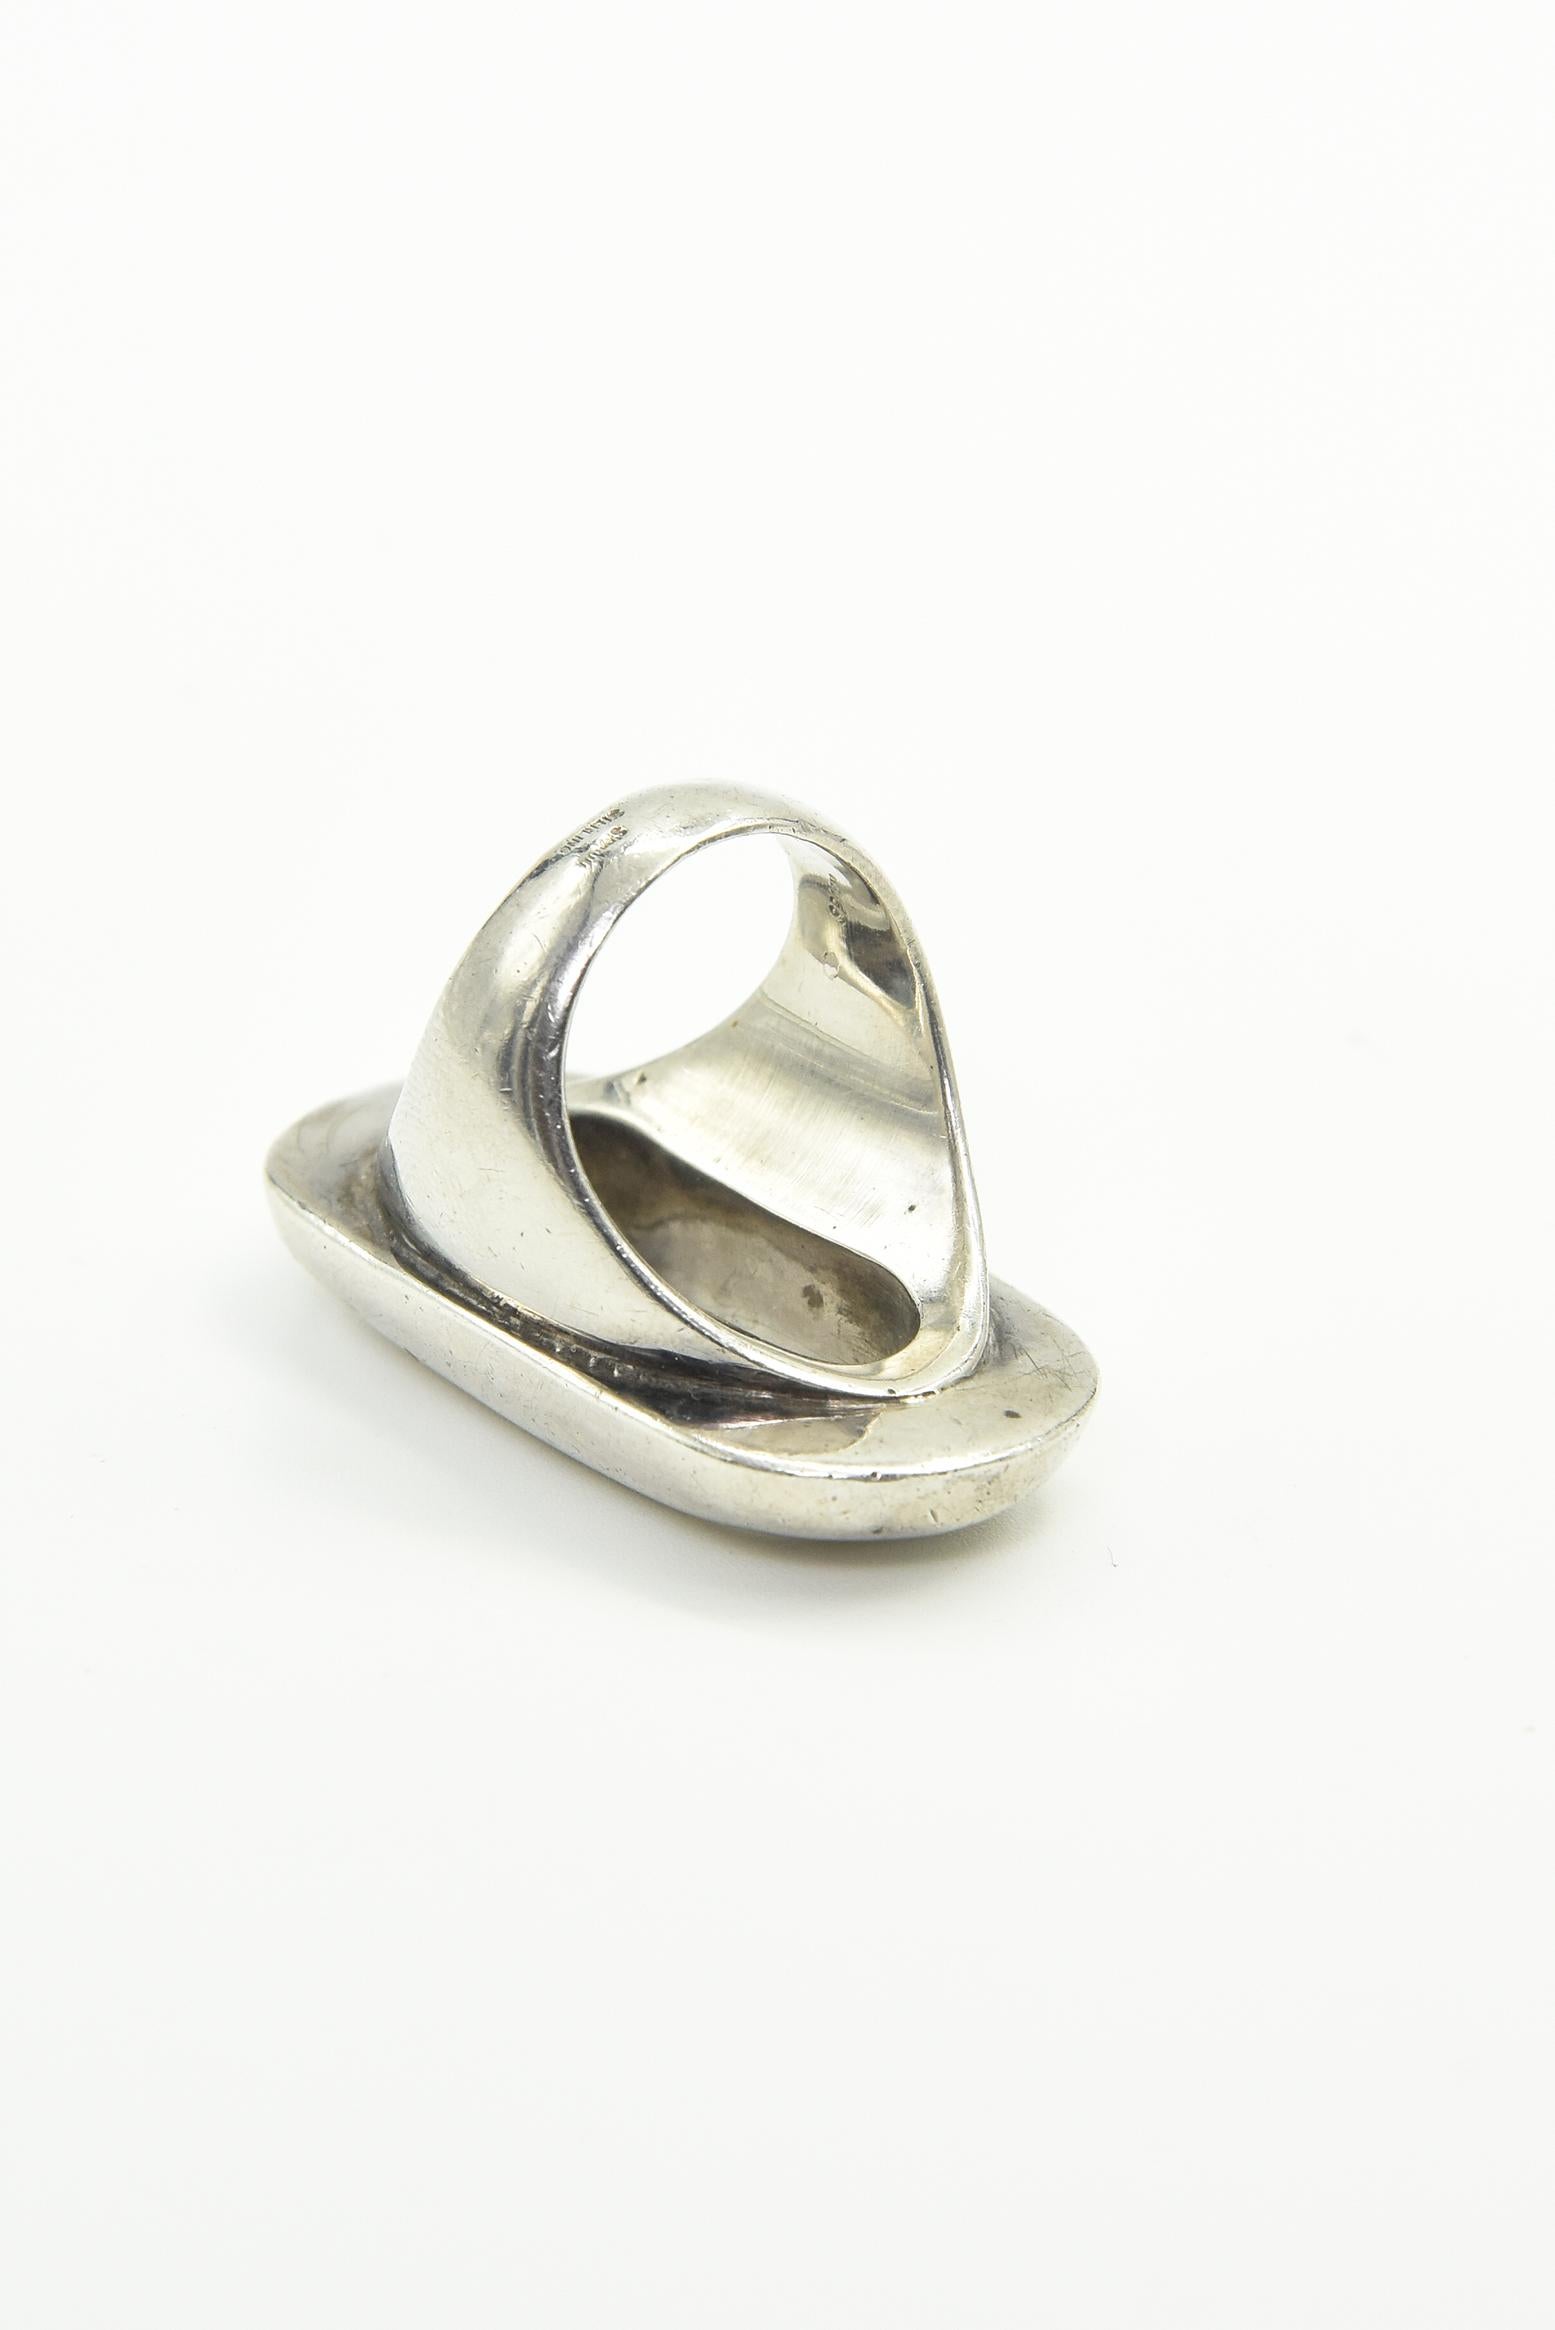 Modernest 1970s S'Paliu Sterling Silver Open Oval Ring 1